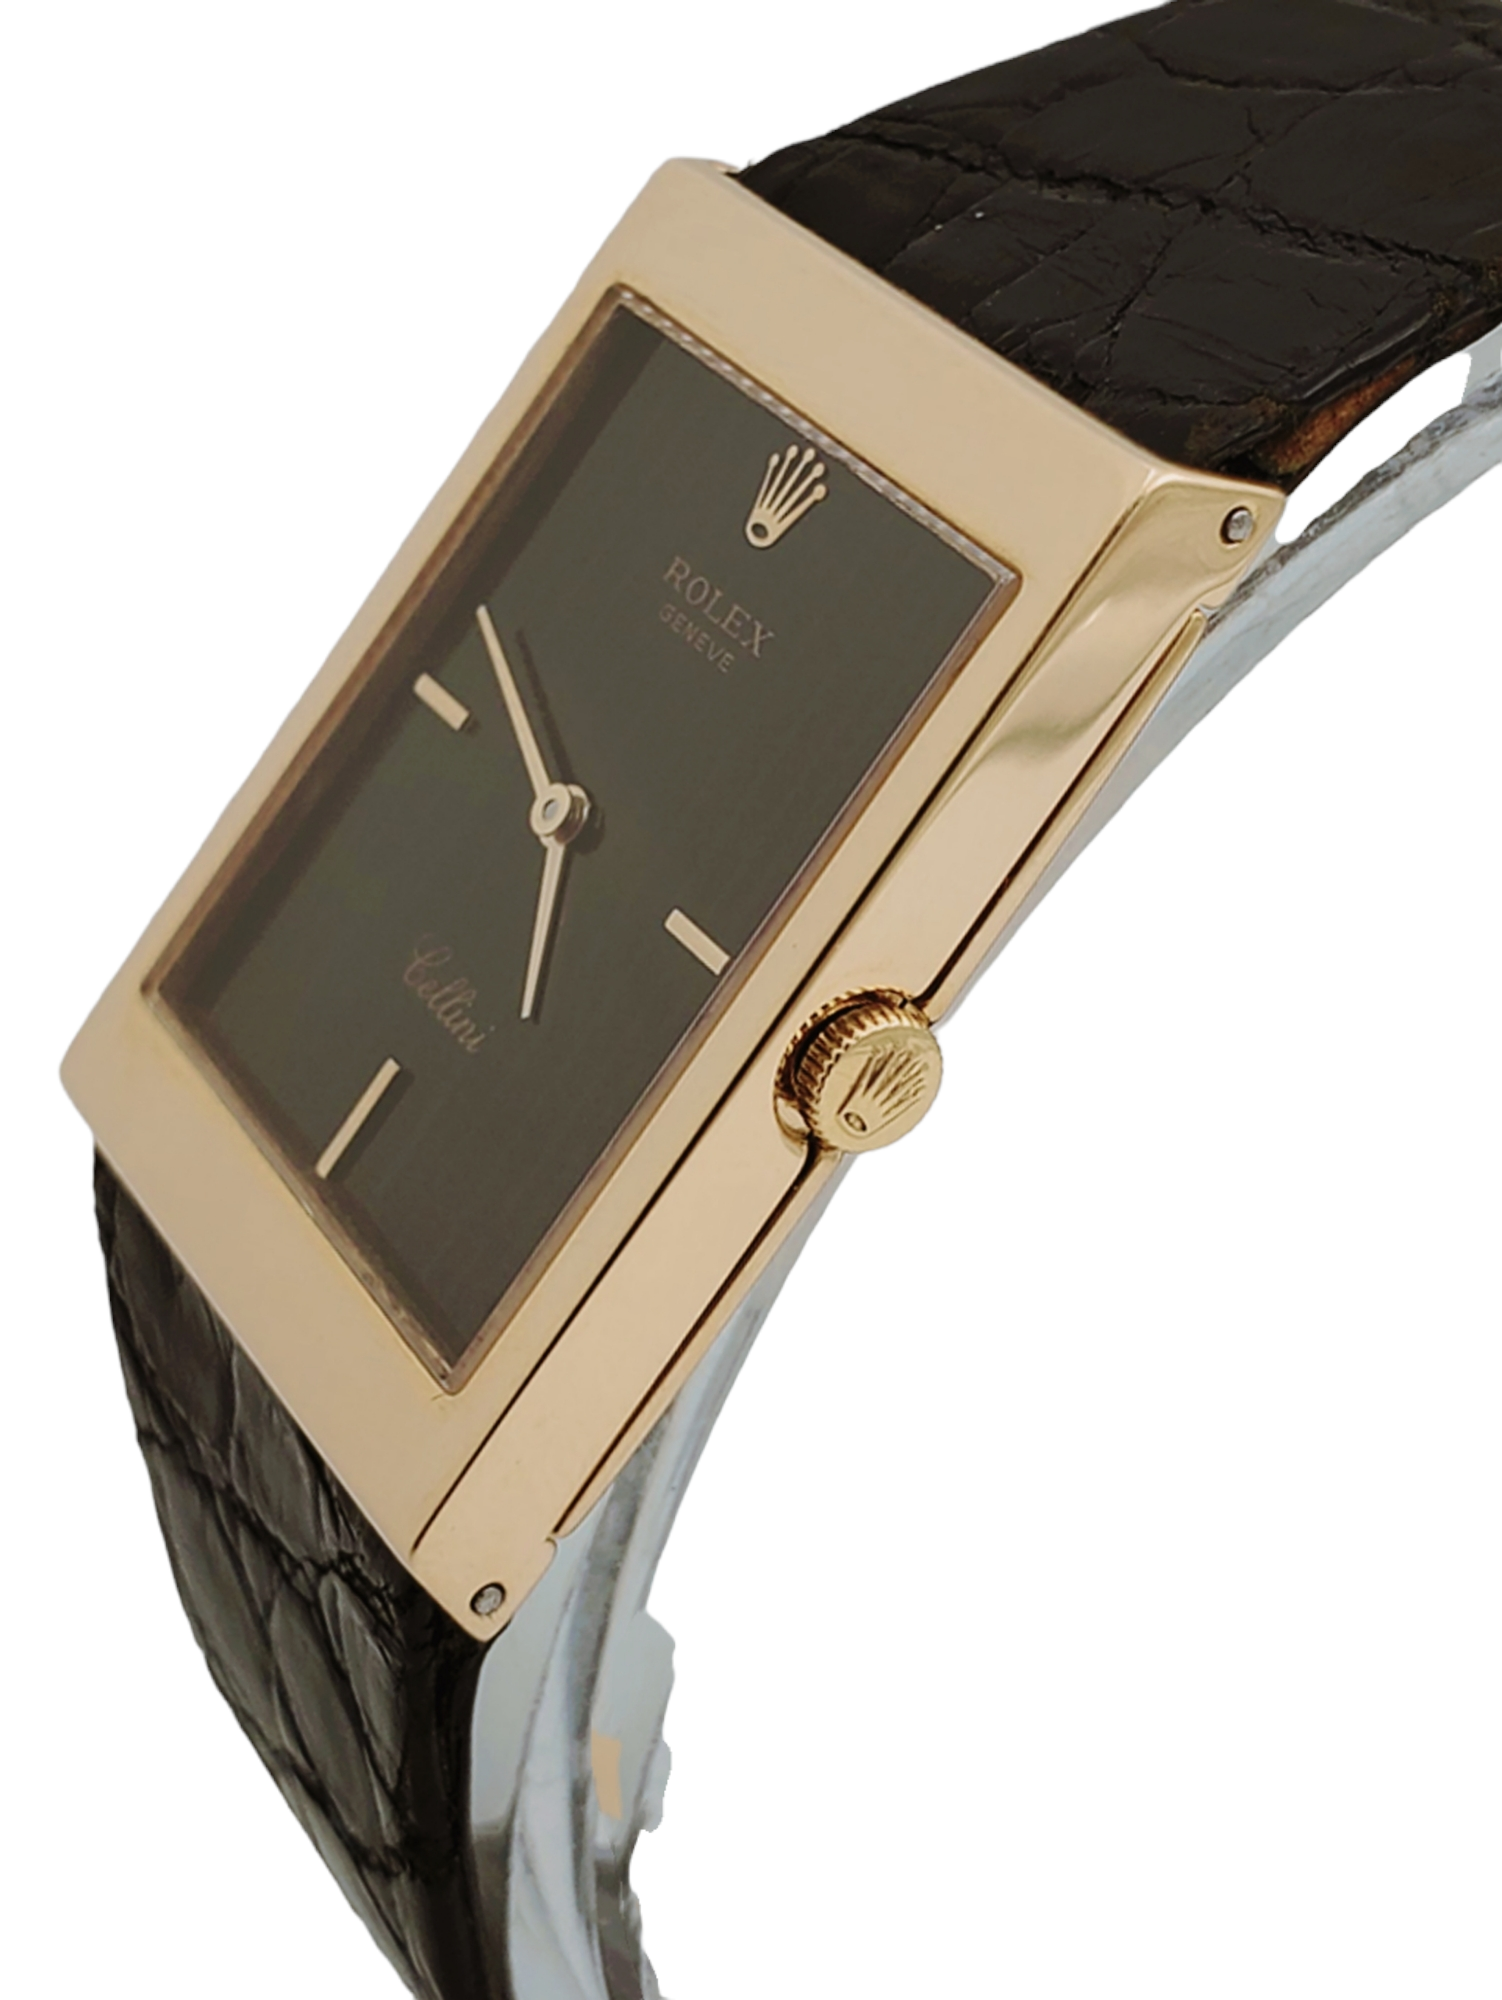 Men's Rolex Cellini Vintage 18K Yellow Gold Watch with Black Tapestry Dial and Black Leather Strap. (Pre-Owned)